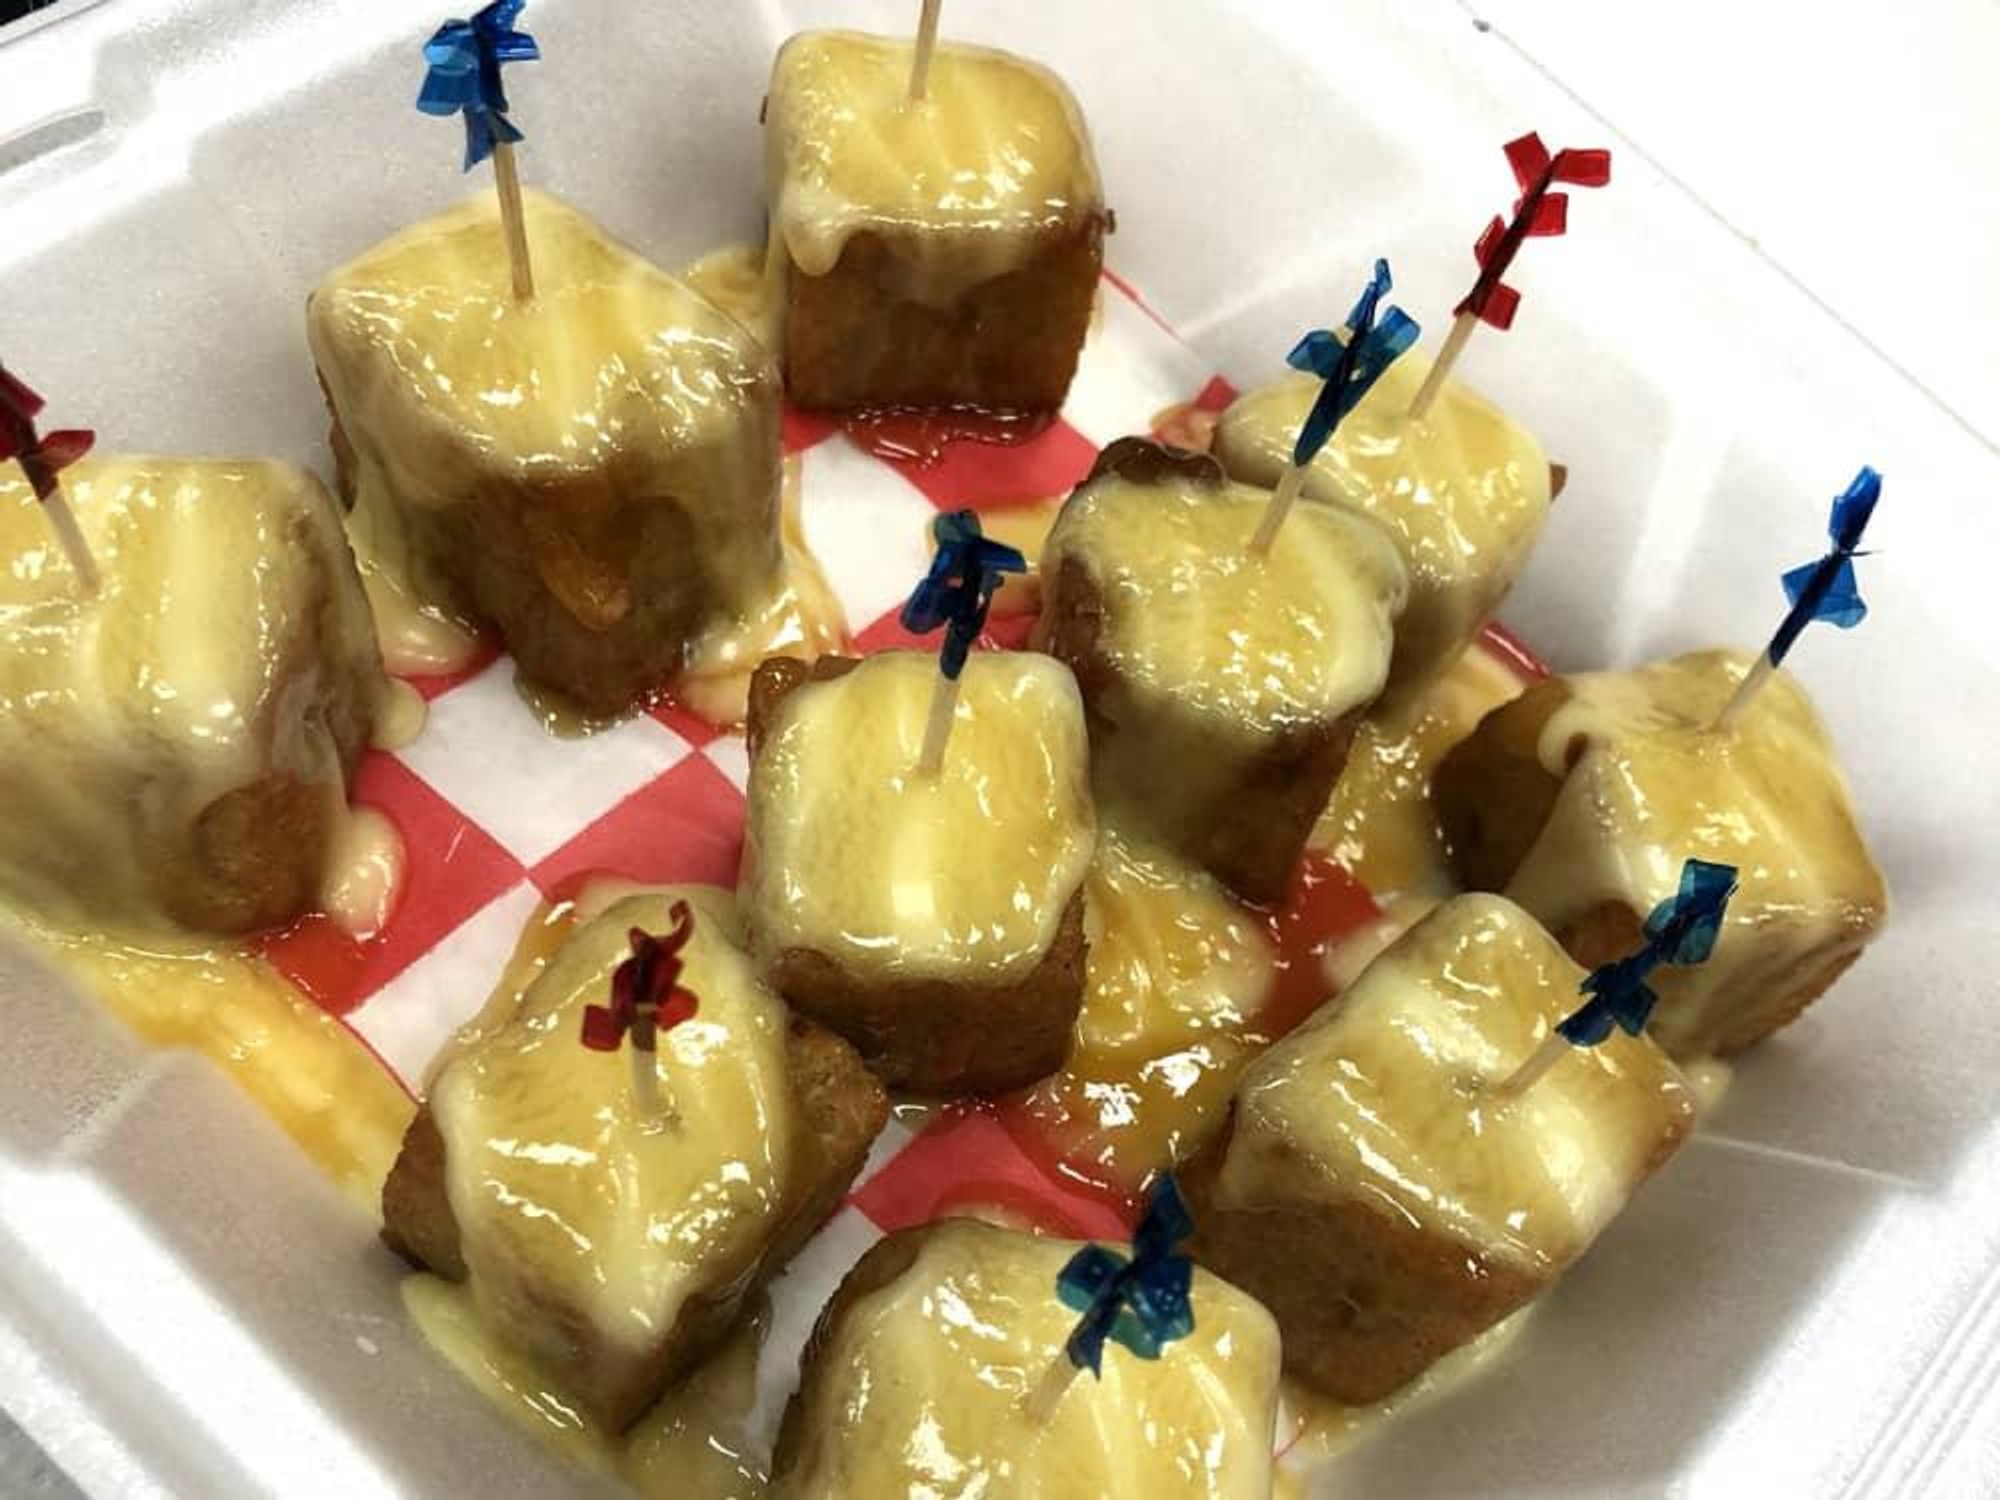 Houston -Gold Buckle Foodie Awards - bread pudding bites